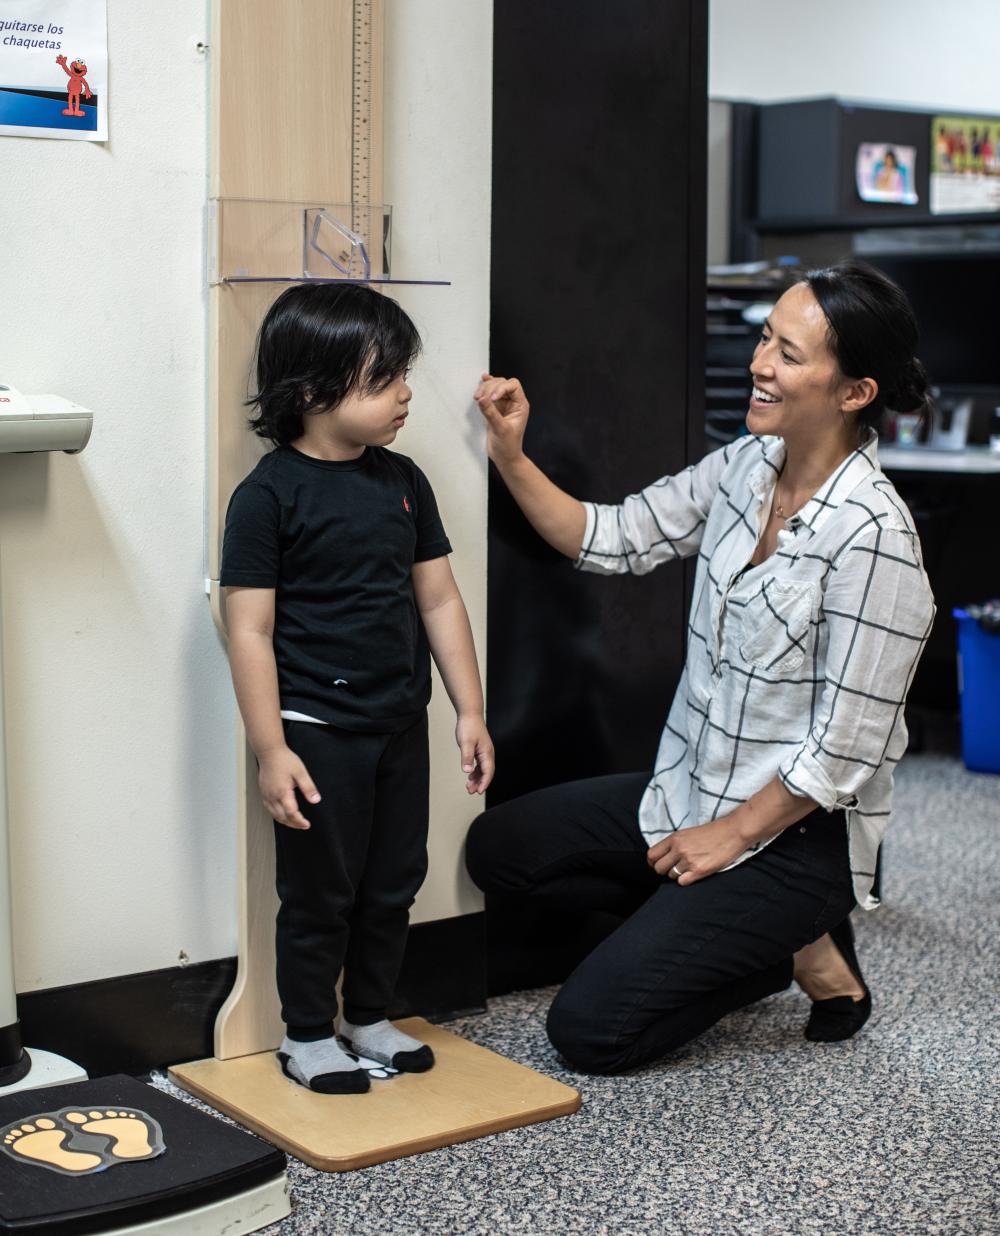 Female provider is kneeling besides a toddler boy as she measures his height using a stadiometer.